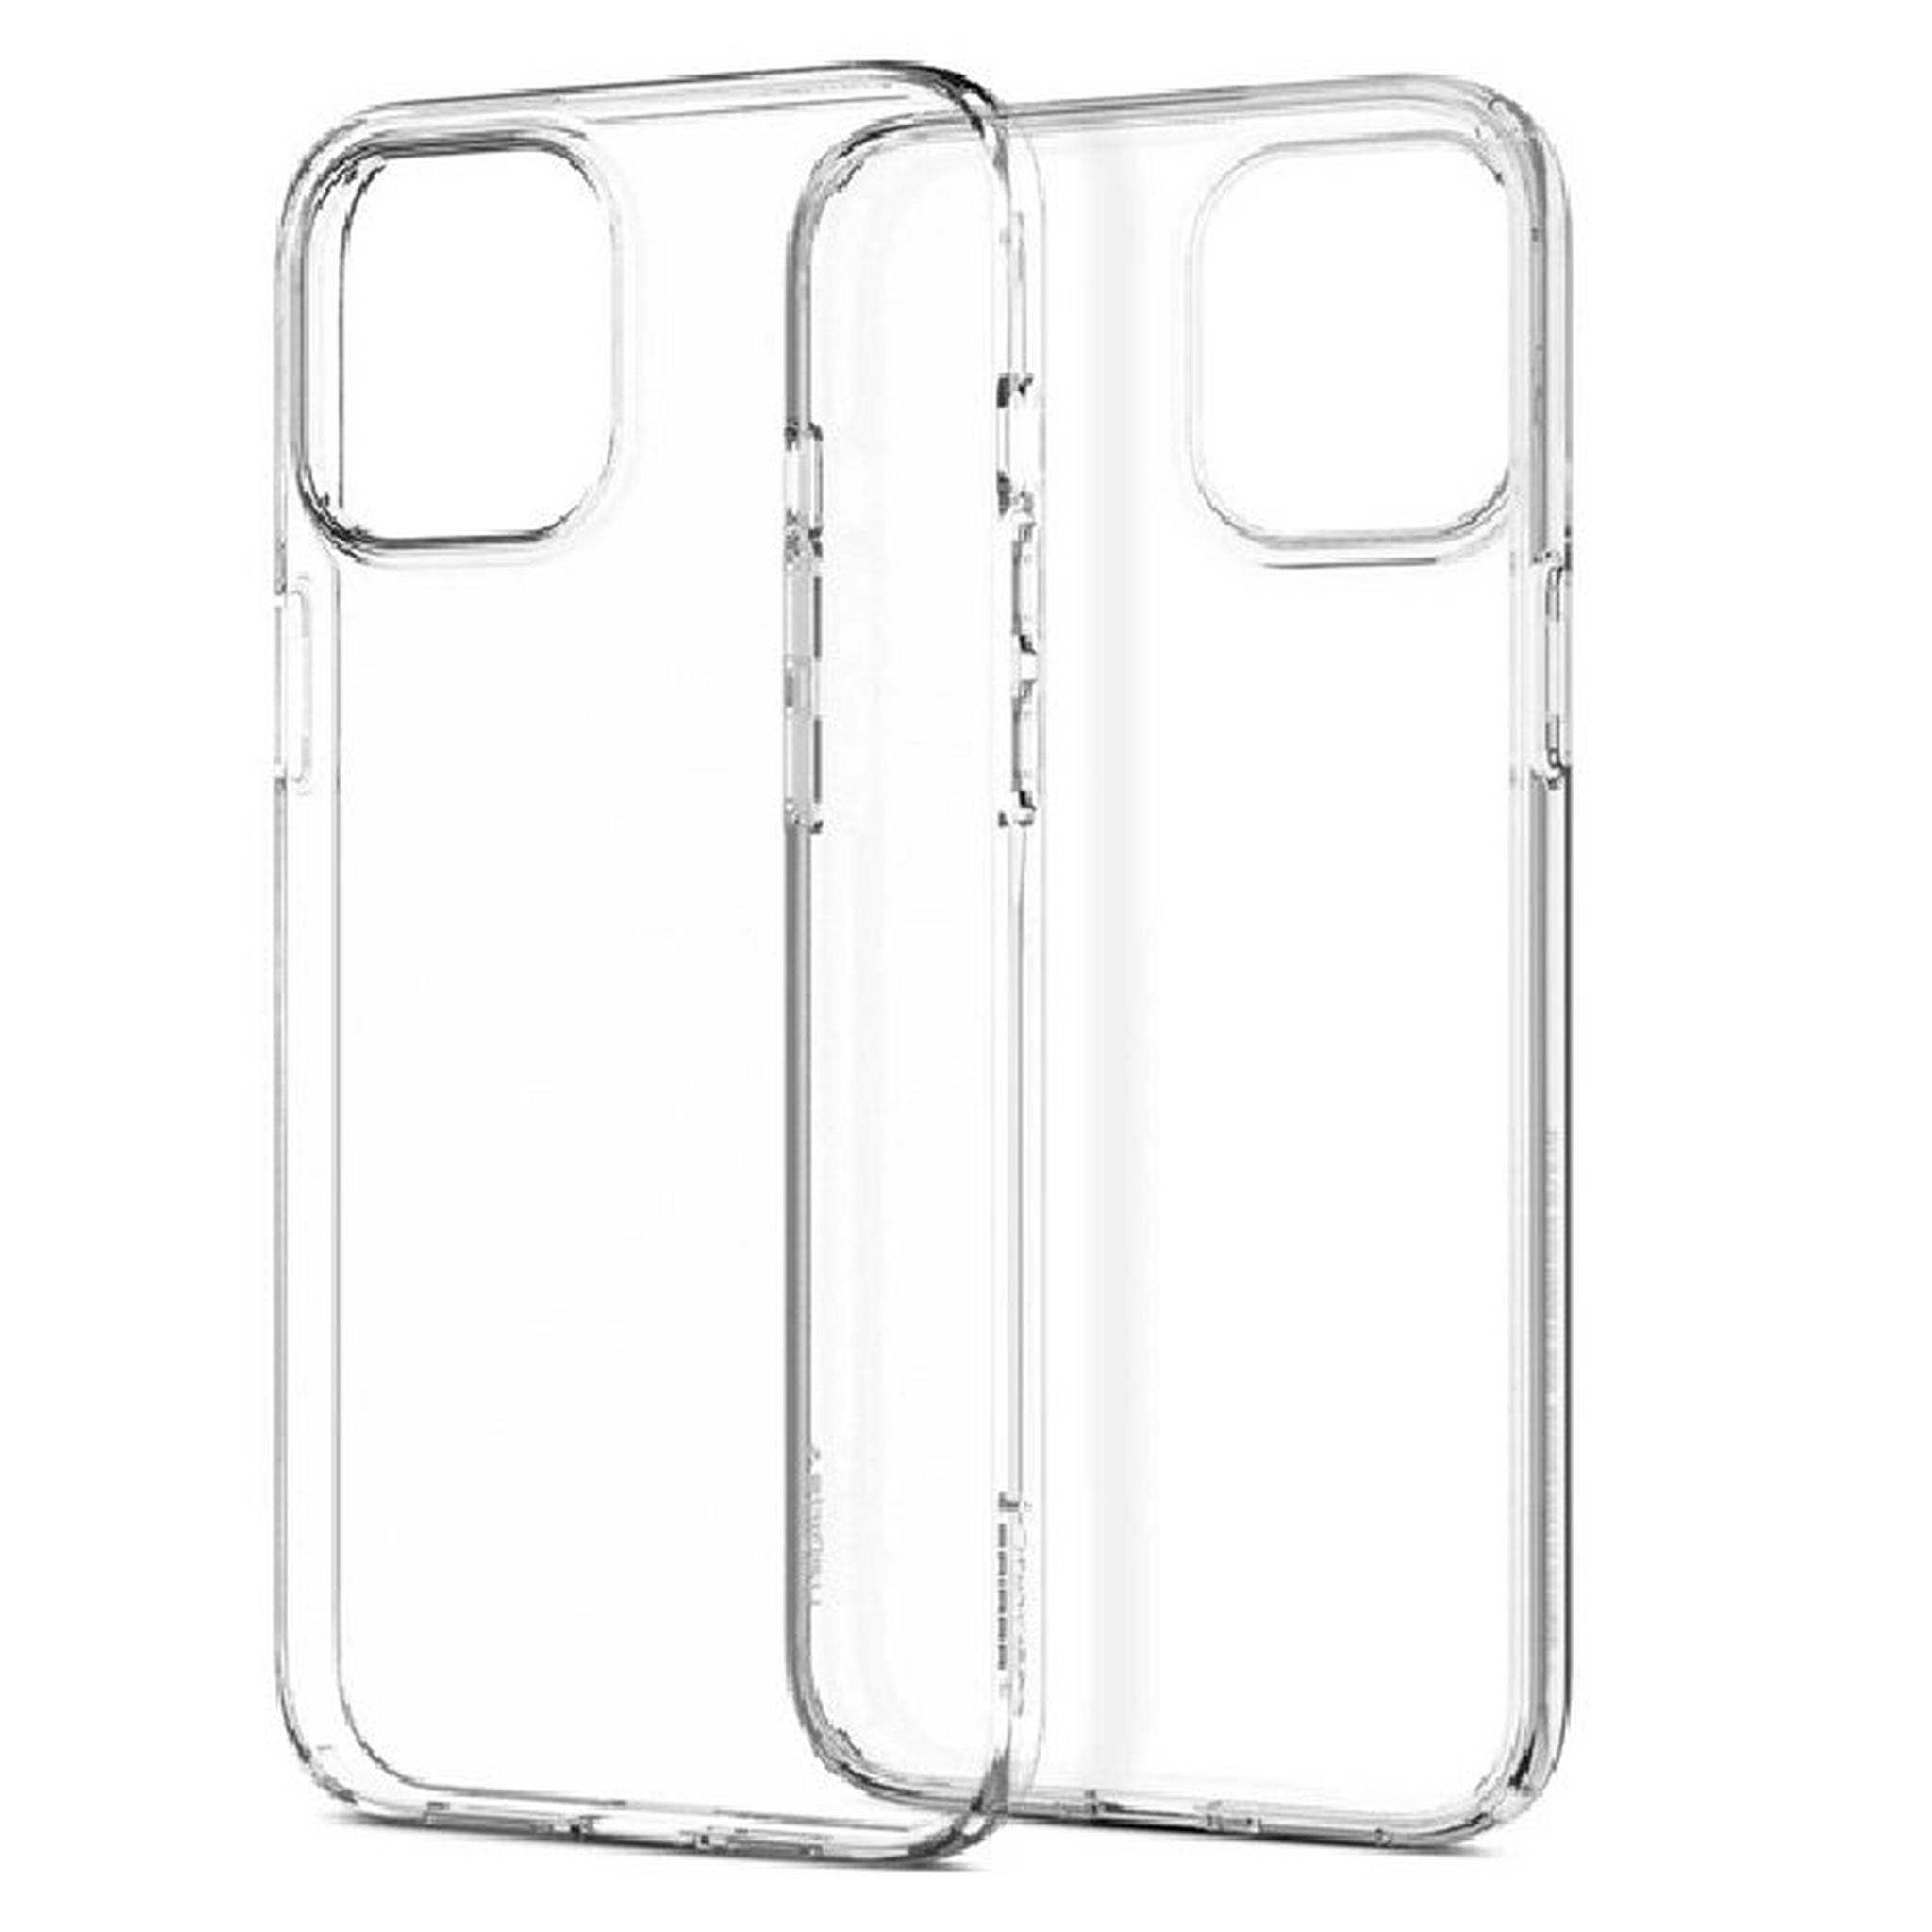 Spigen Crystal iPhone 13 Pro Max Case - Crystal Clear